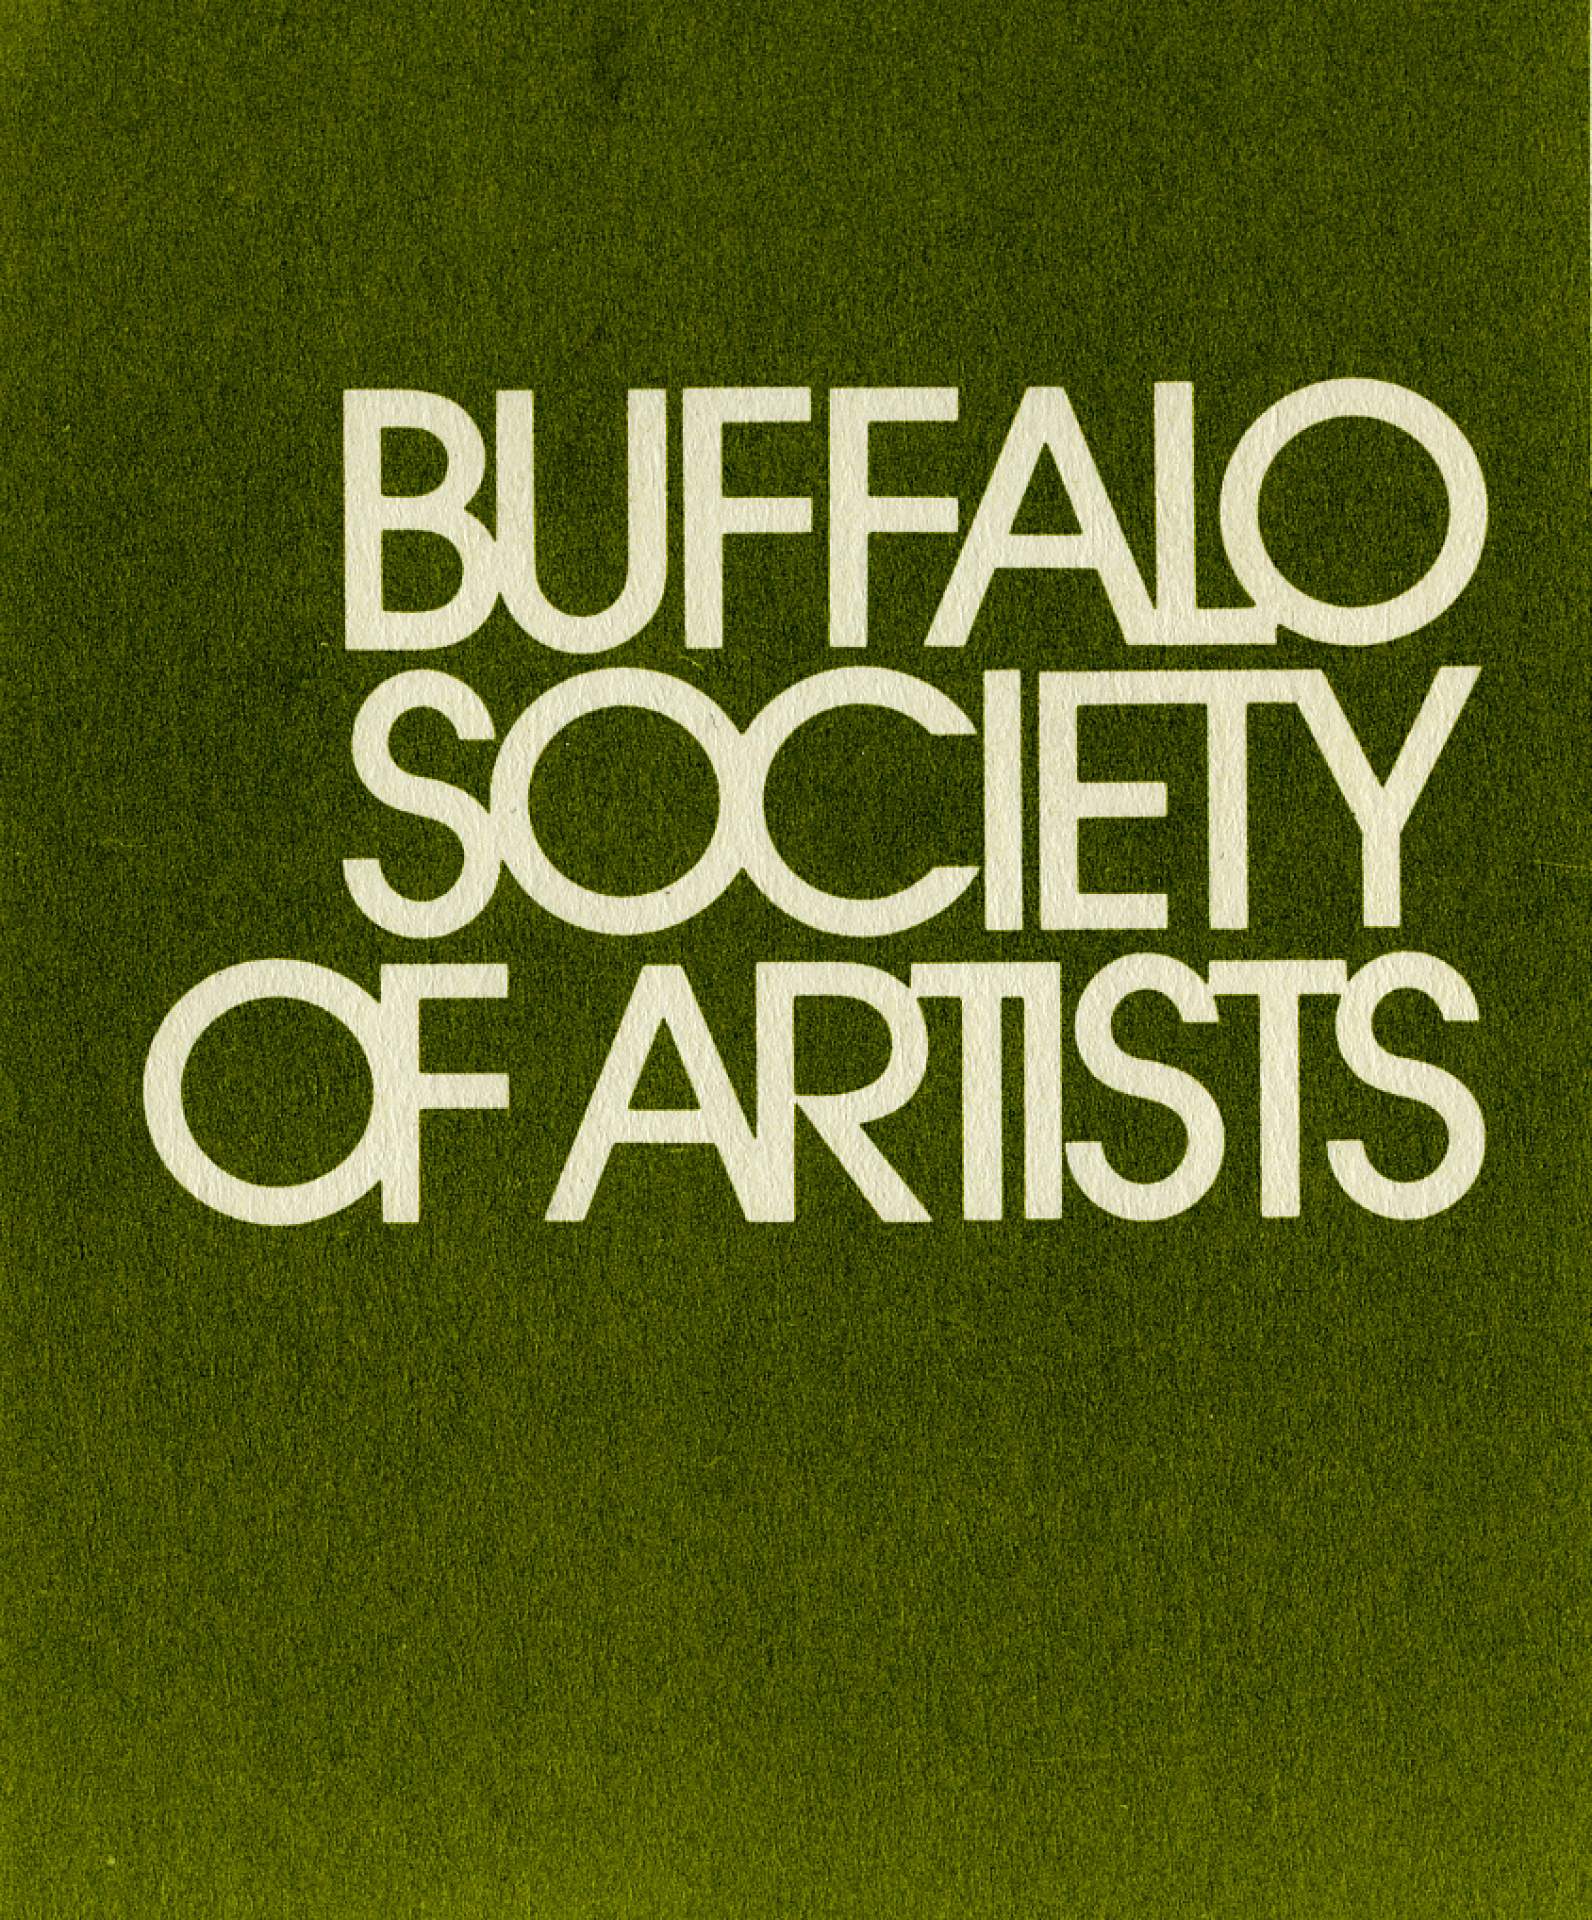 83rd Annual Exhibition, Buffalo Society of Artists